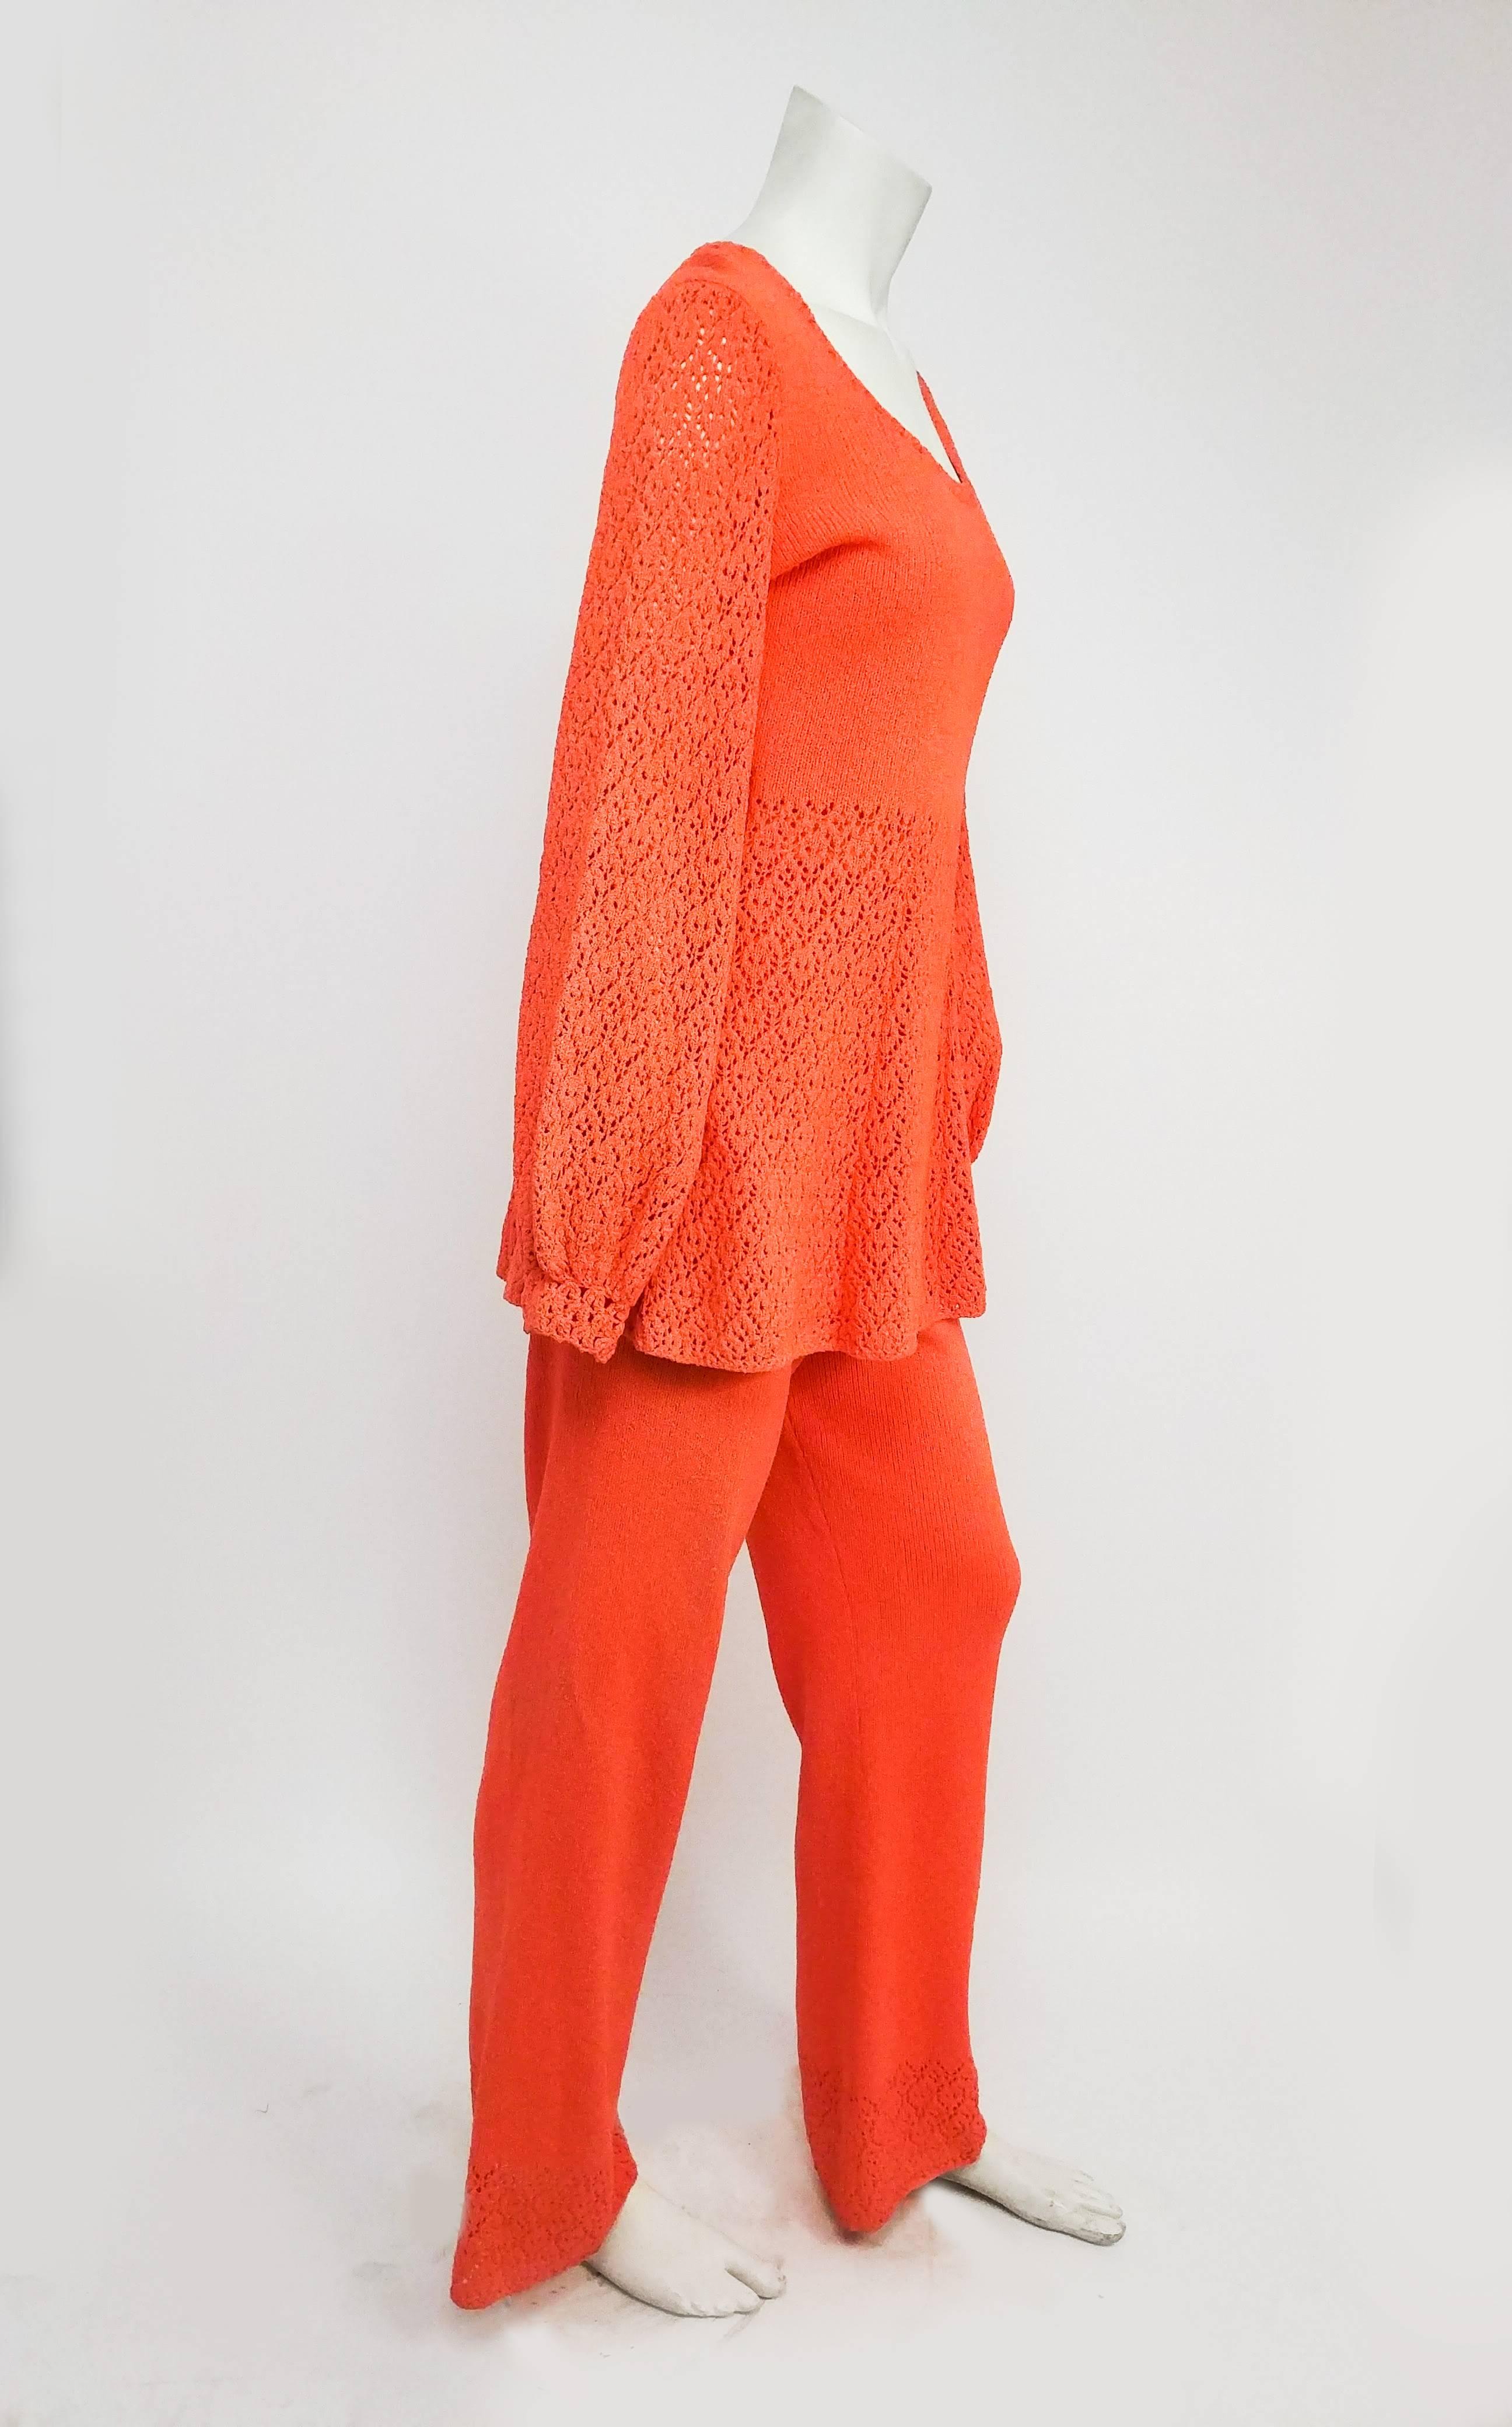 1970s Orange Crochet Two Piece Set. Tunic top nips in at natural waist and flares out with open crochet work. Long sleeves are elasticized at wrists to create balloon effect. Zips up back. Elasticized waistband on pants, flared legs. 